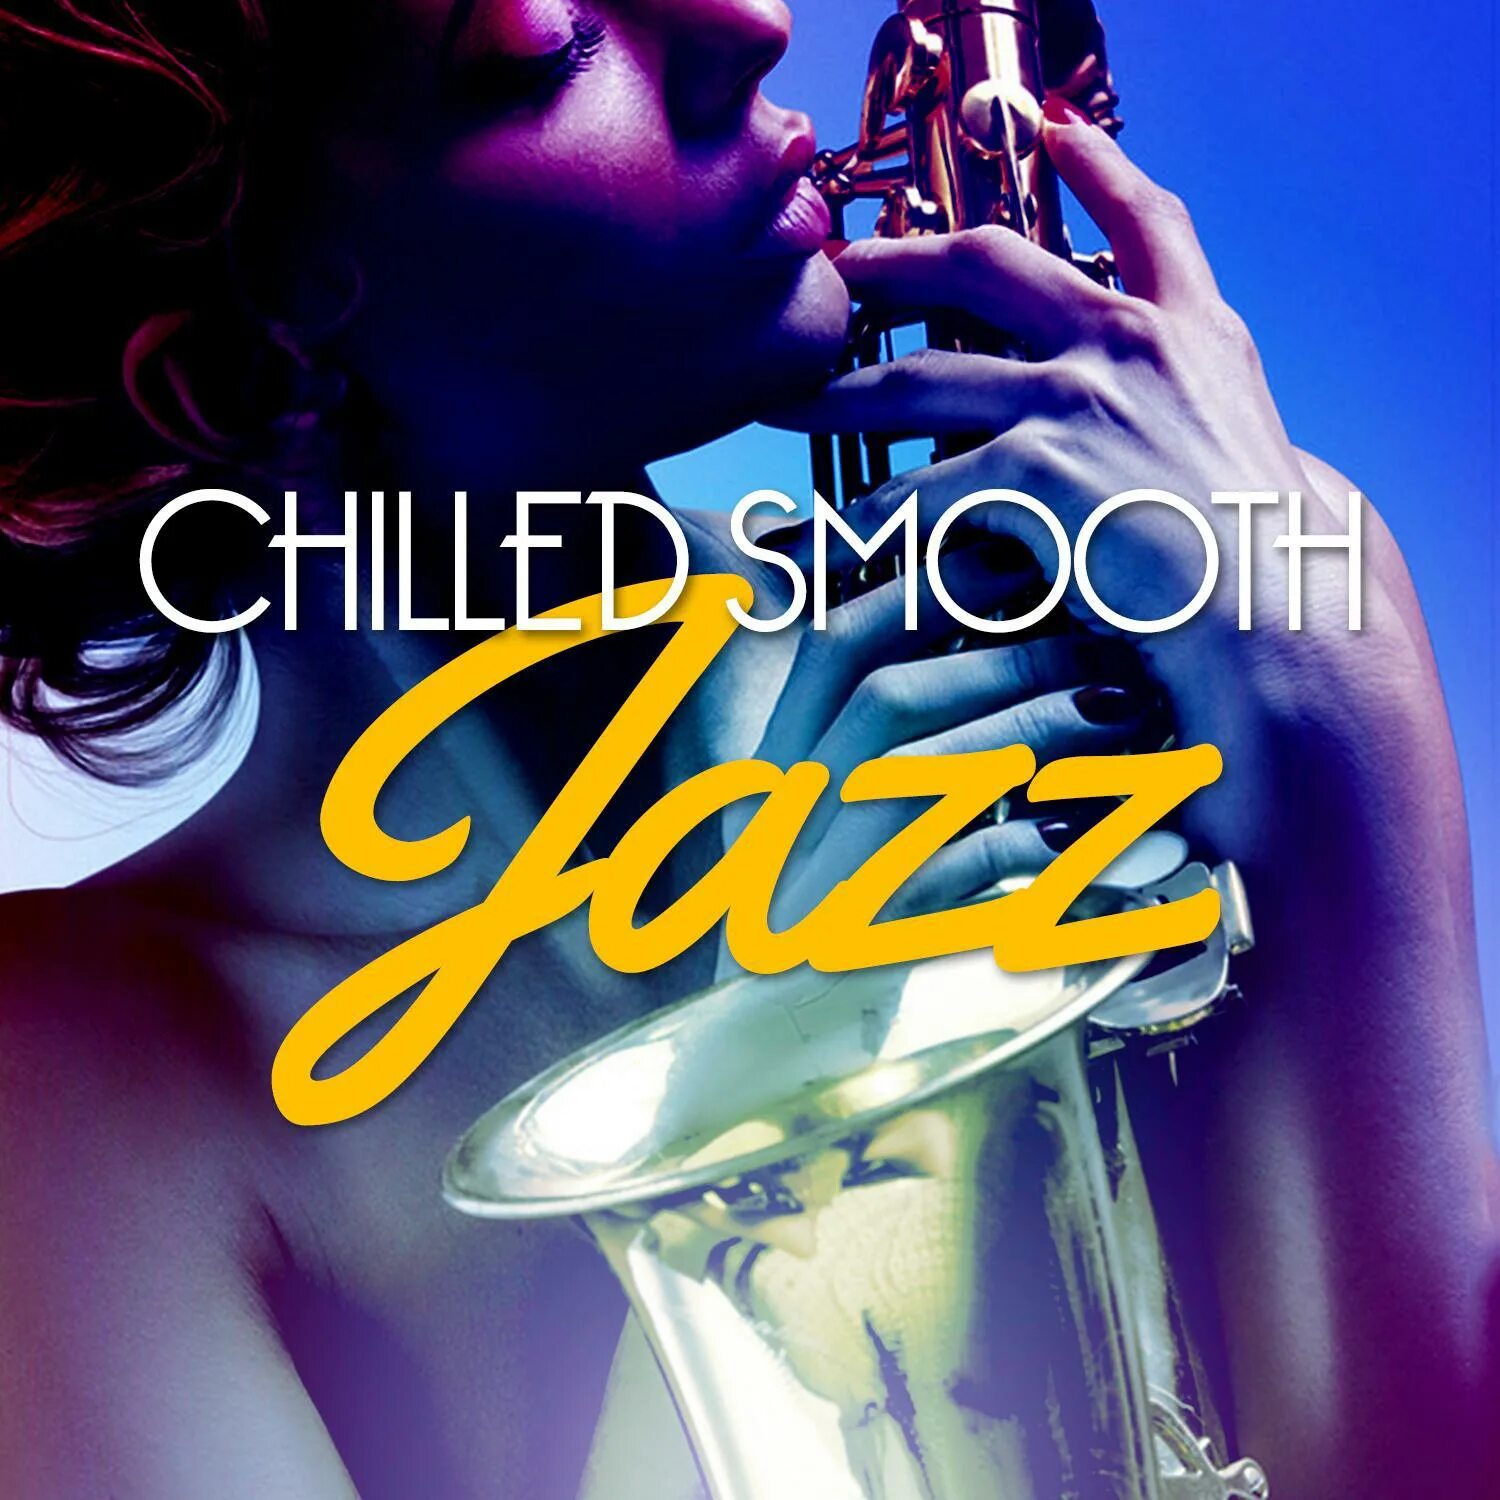 Chilled jazz. Chill Jazz. Jazz Chillout. Jazzy Chillout. Smooth Jazz n Chill.